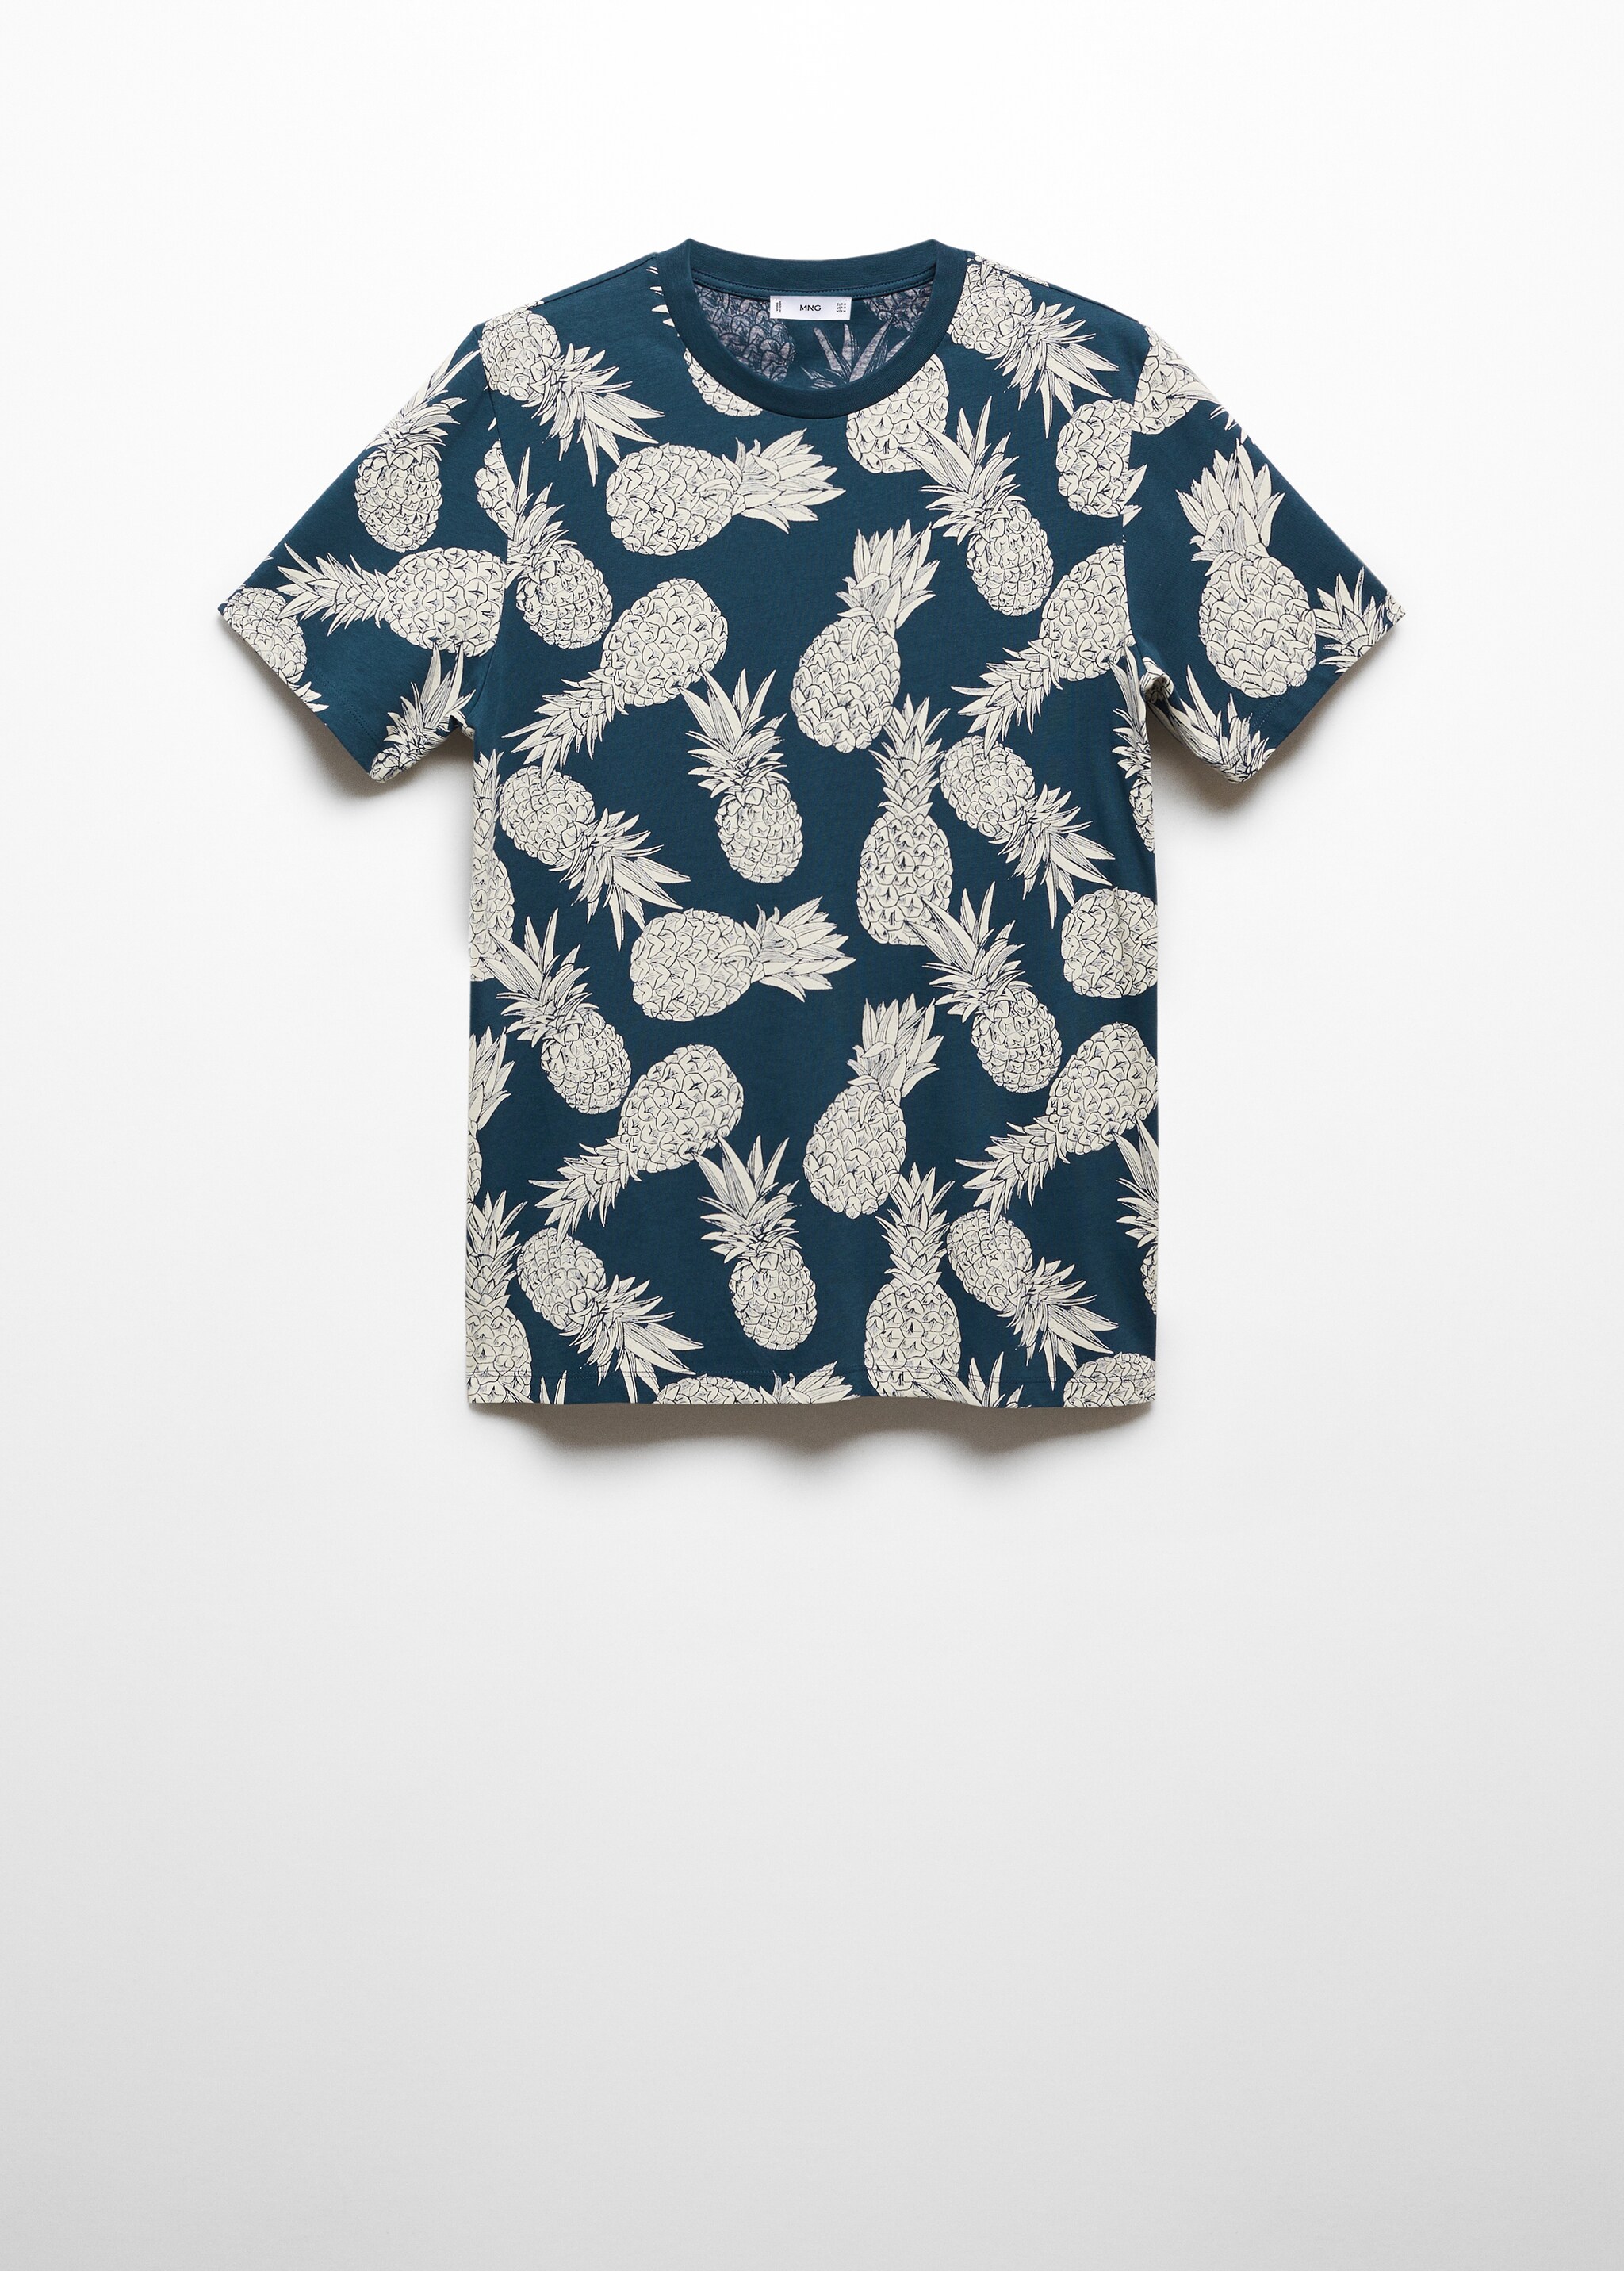 100% cotton shirt with pineapple print - Article without model